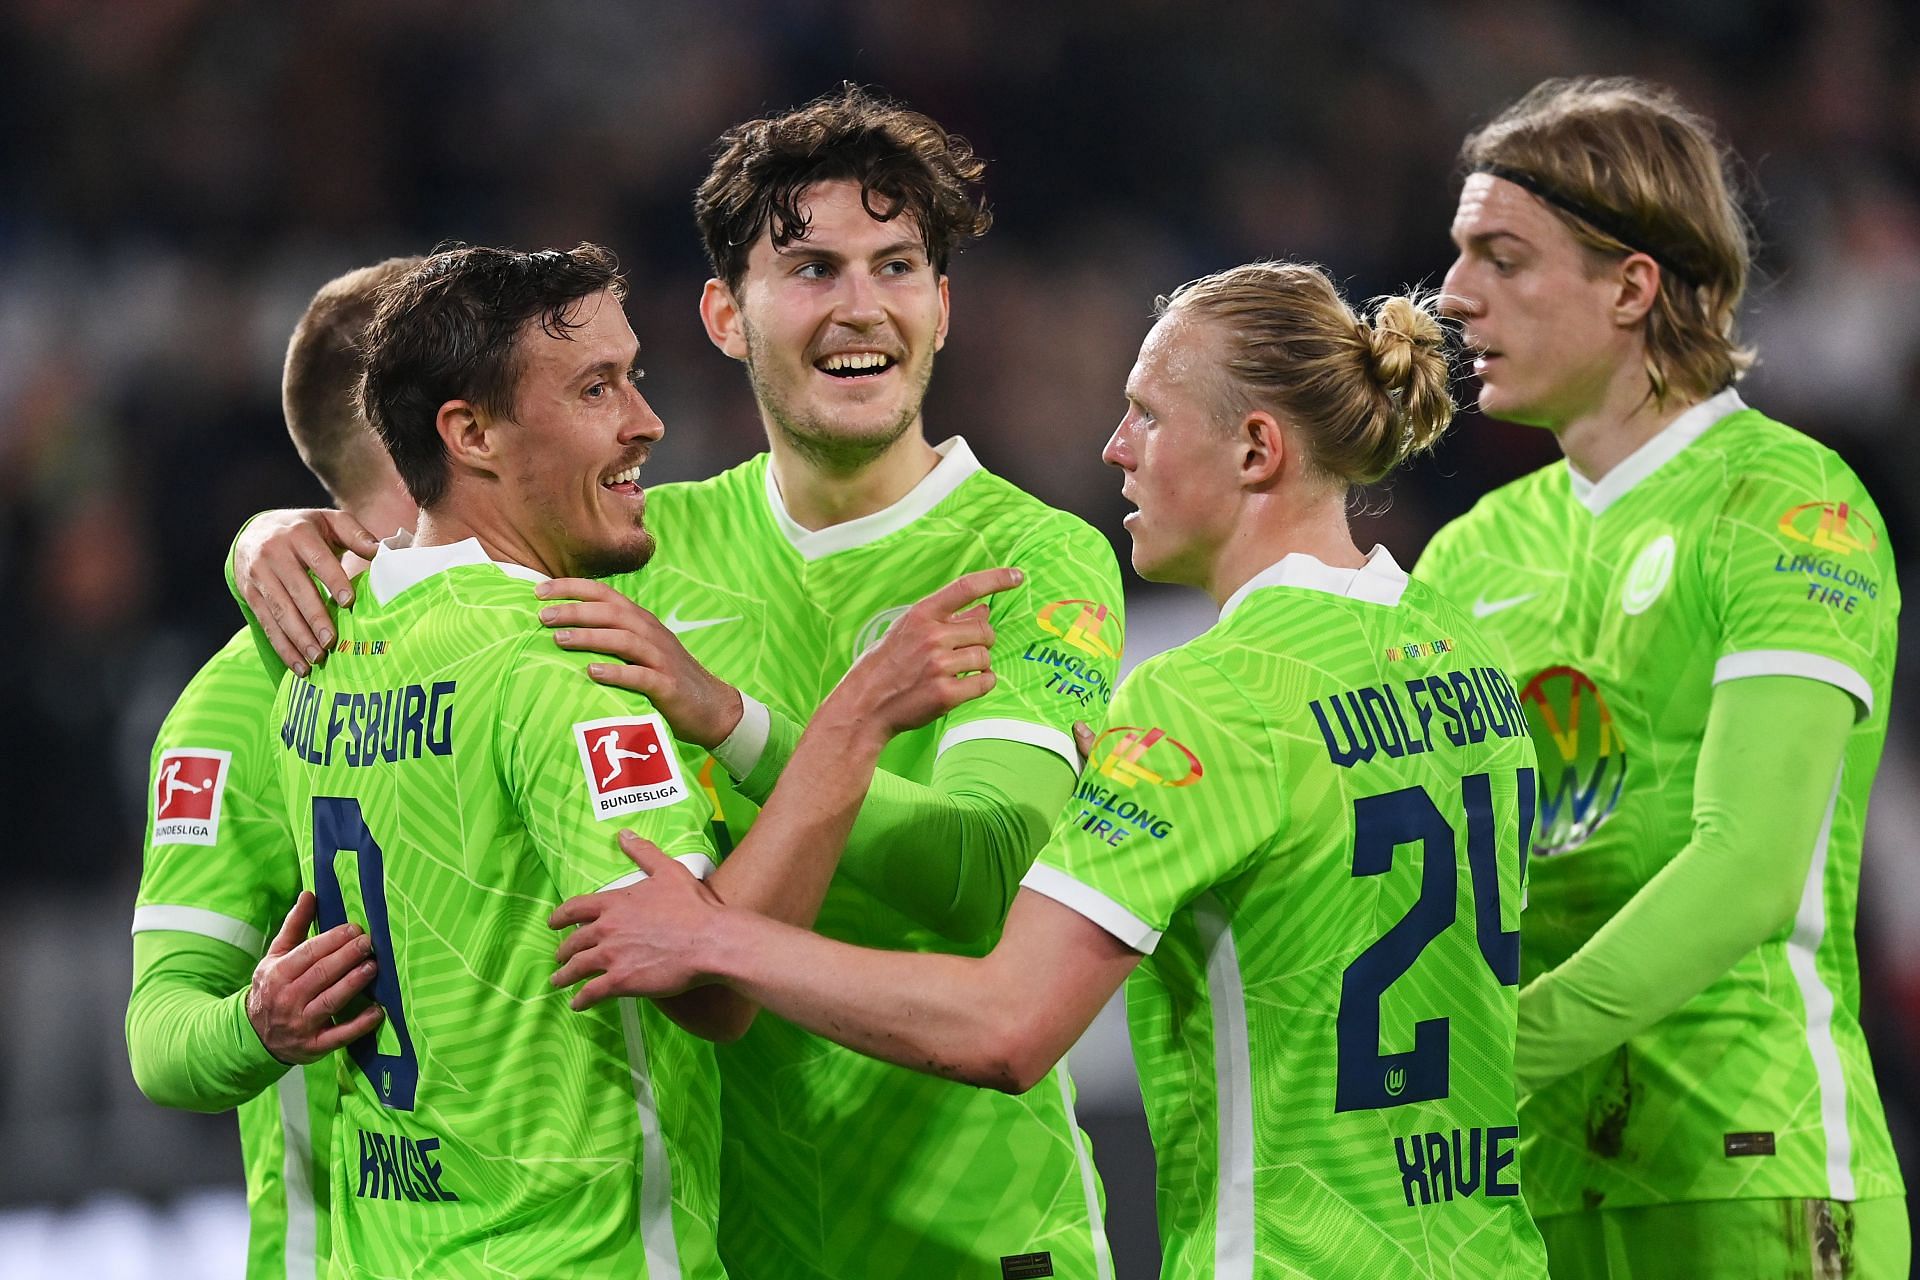 VfL Wolfsburg need to be at their best